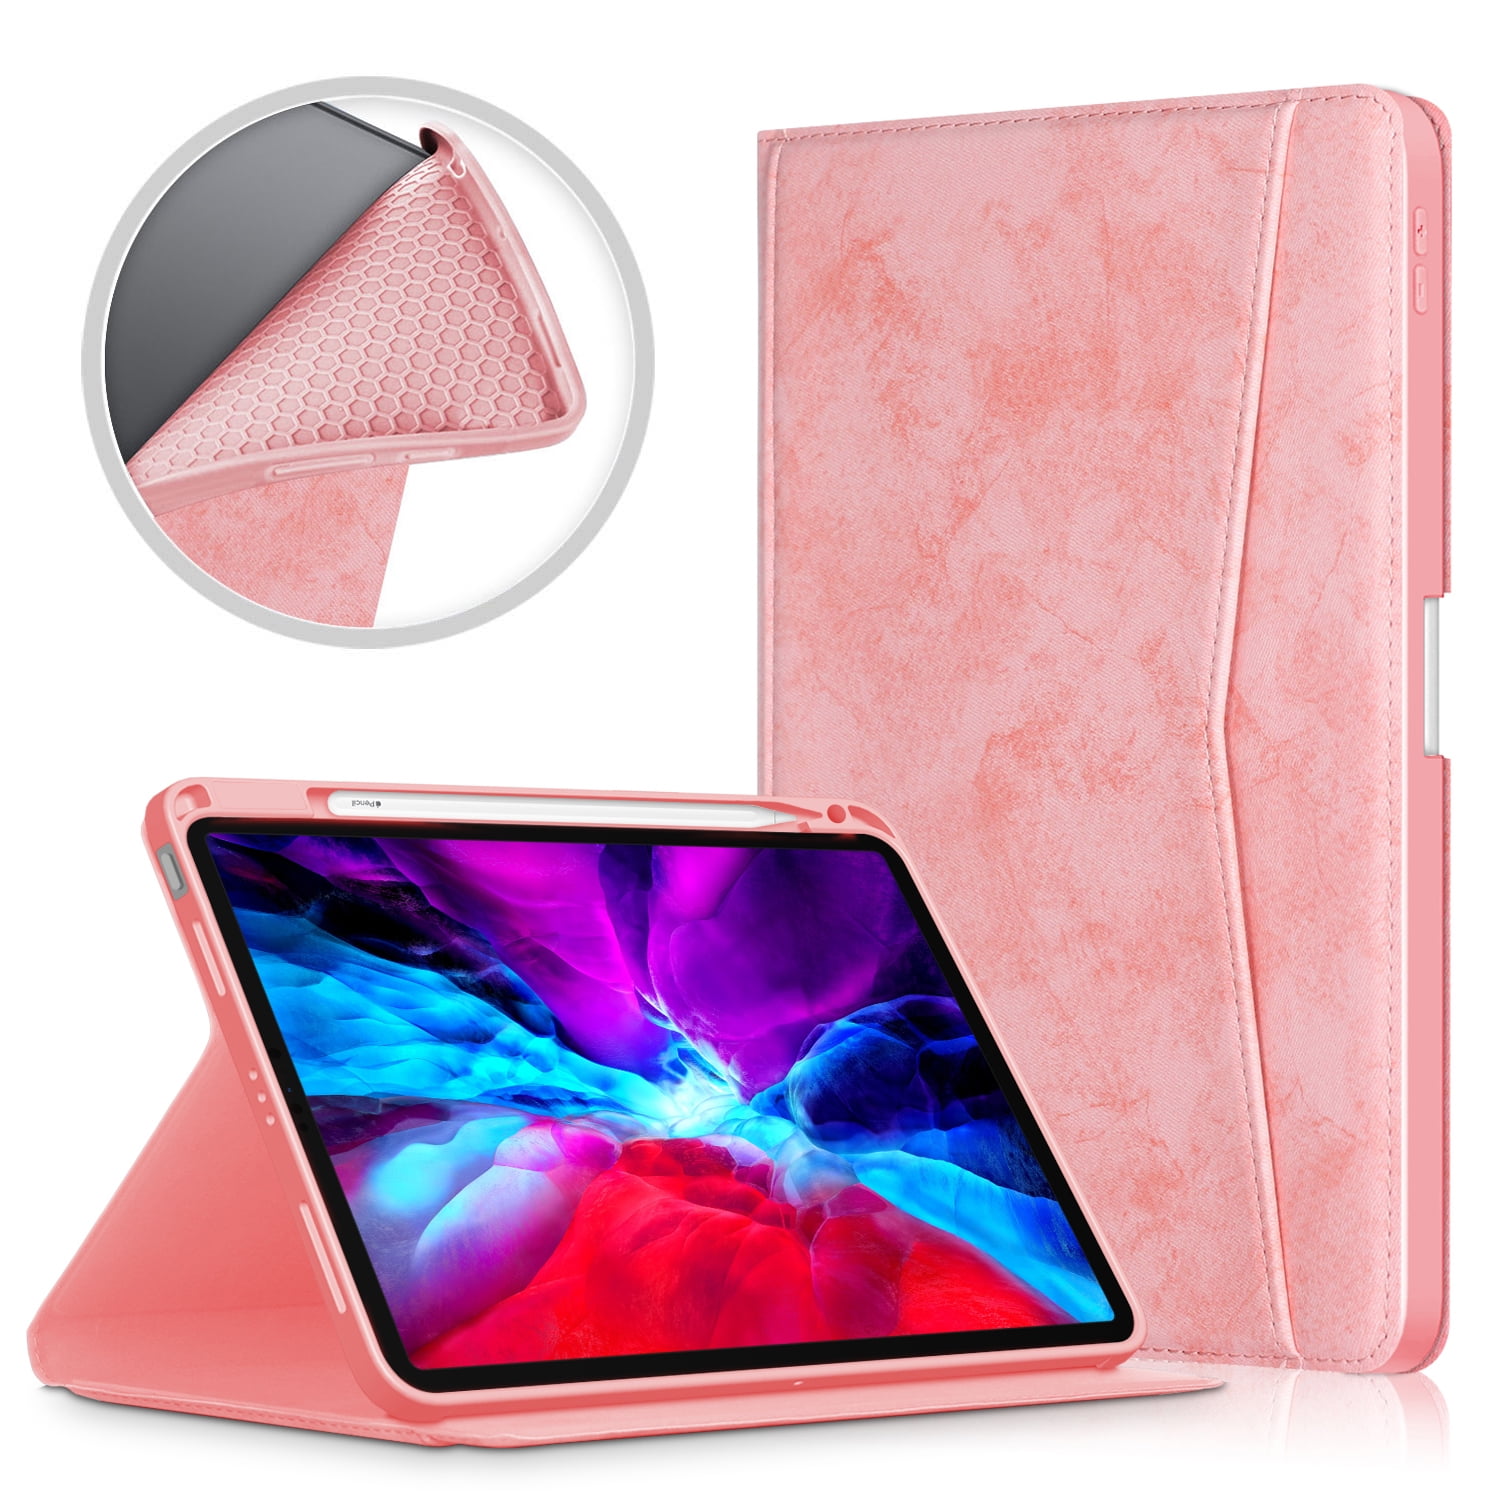 Colorful pink texture iPad premium vinyl skin skin for the iPad all models